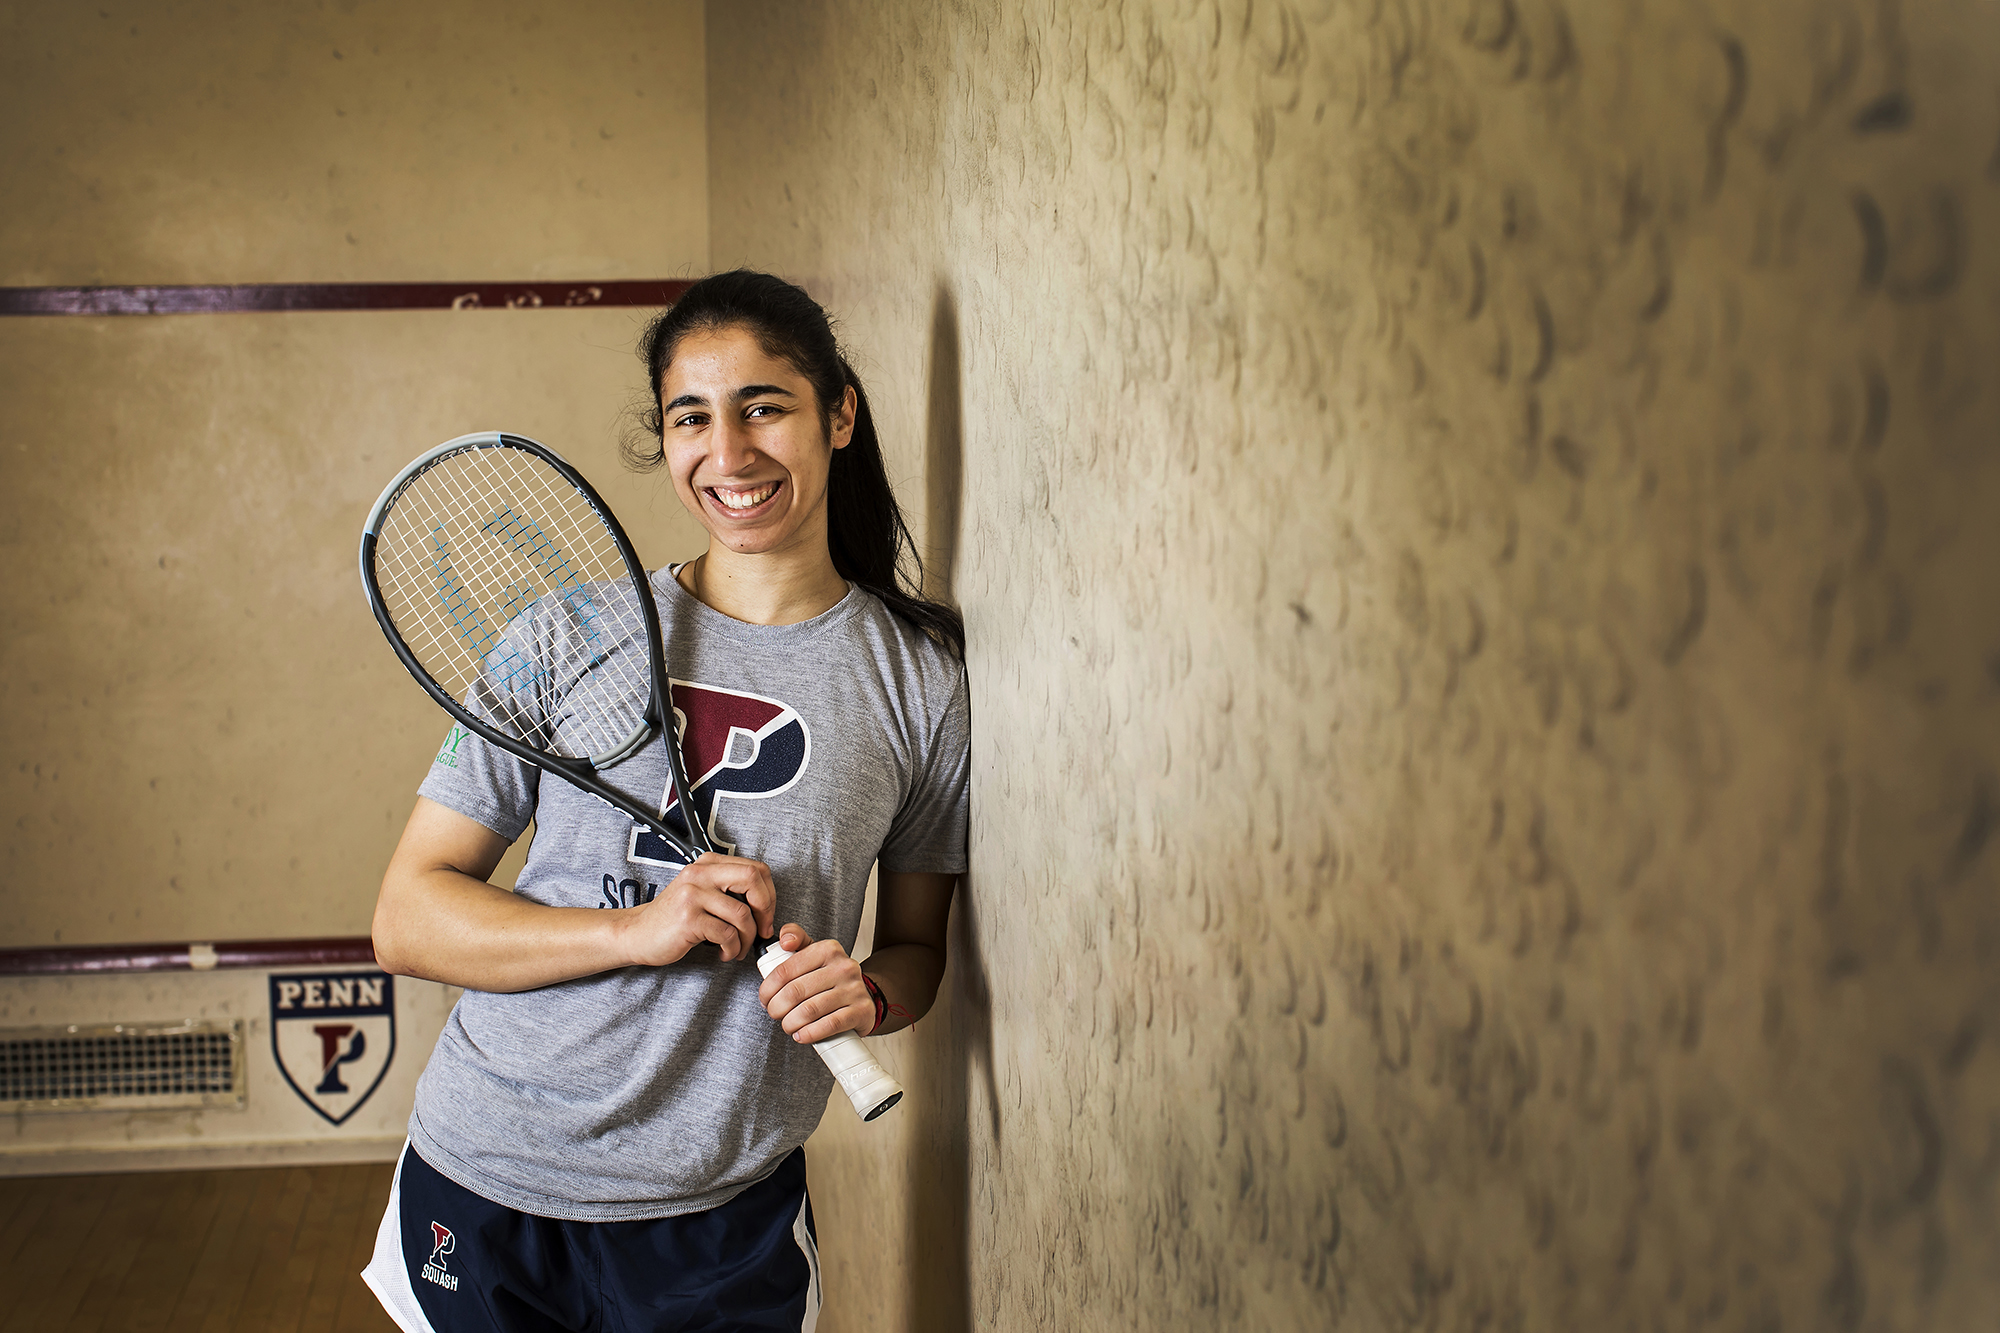 Reeham Sedky poses with her squash racket on the squash court.